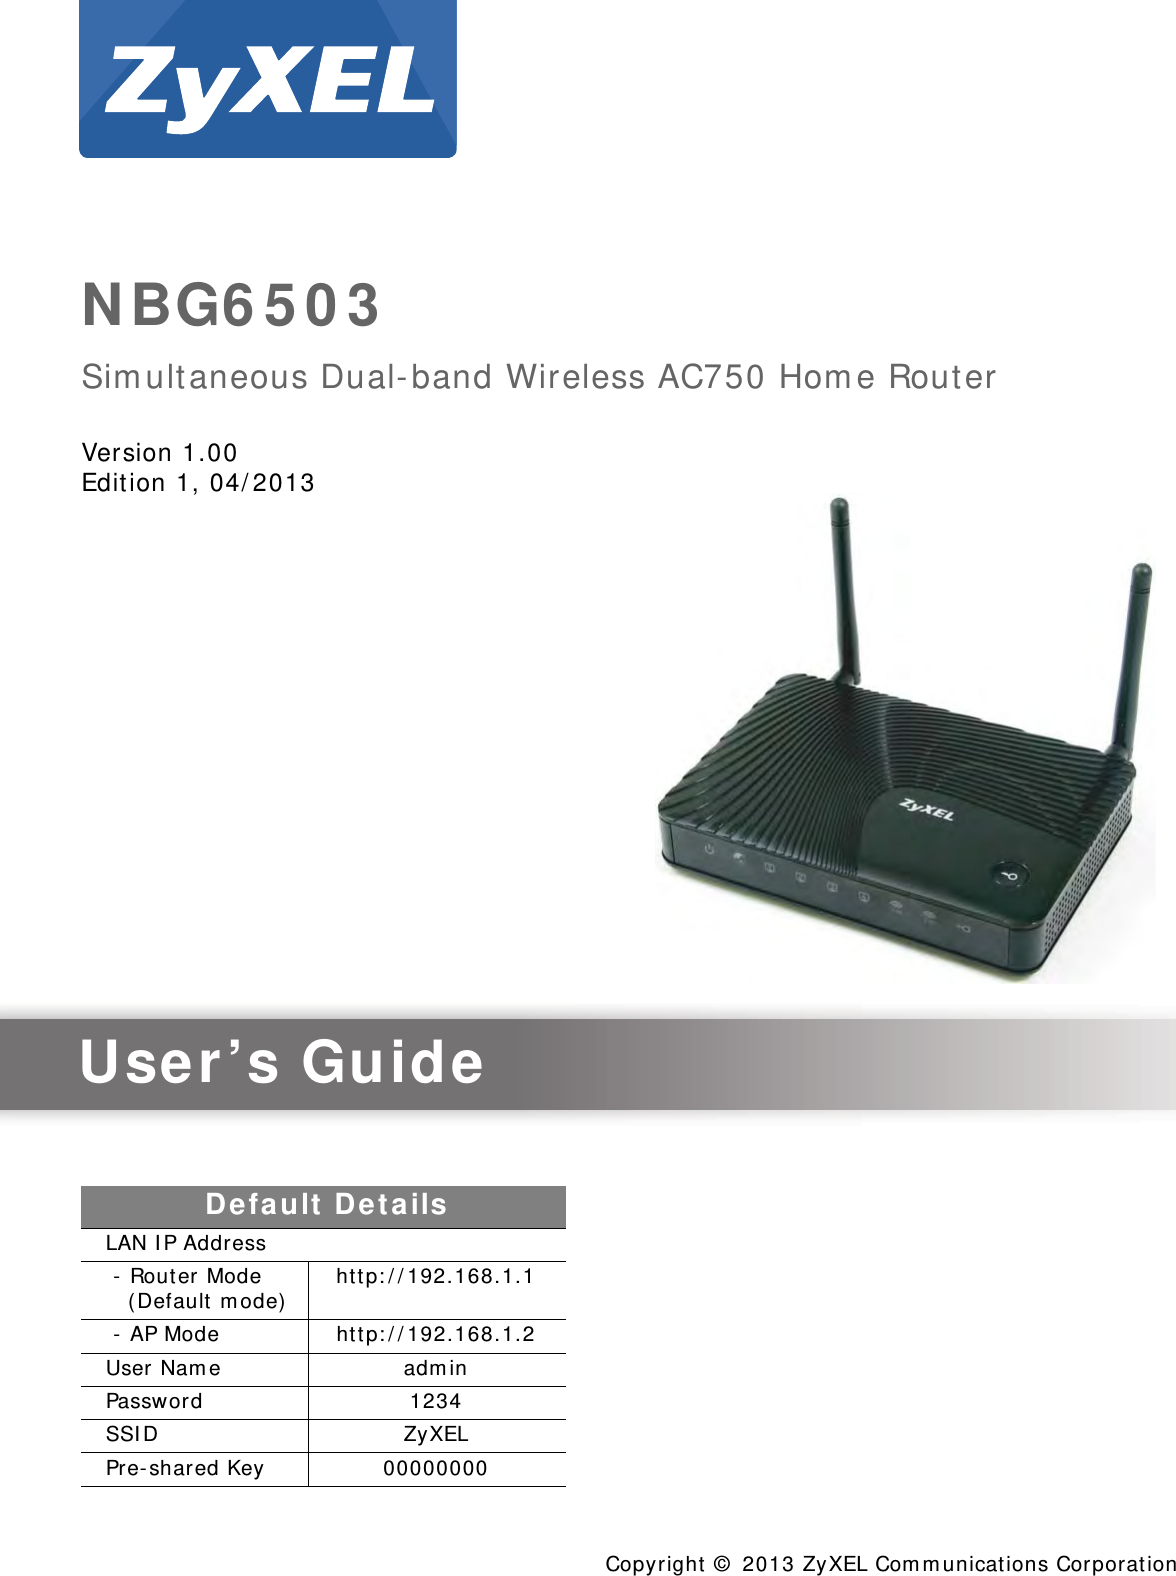 Quick Start Guidewww.zyxel.comNBG6503Simultaneous Dual-band Wireless AC750 Home RouterVersion 1.00Edition 1, 04/2013Copyright © 2013 ZyXEL Communications CorporationUser’s GuideDefault DetailsLAN IP Address - Router Mode    (Default mode) http://192.168.1.1 - AP Mode http://192.168.1.2User Name adminPassword 1234SSID ZyXELPre-shared Key 00000000